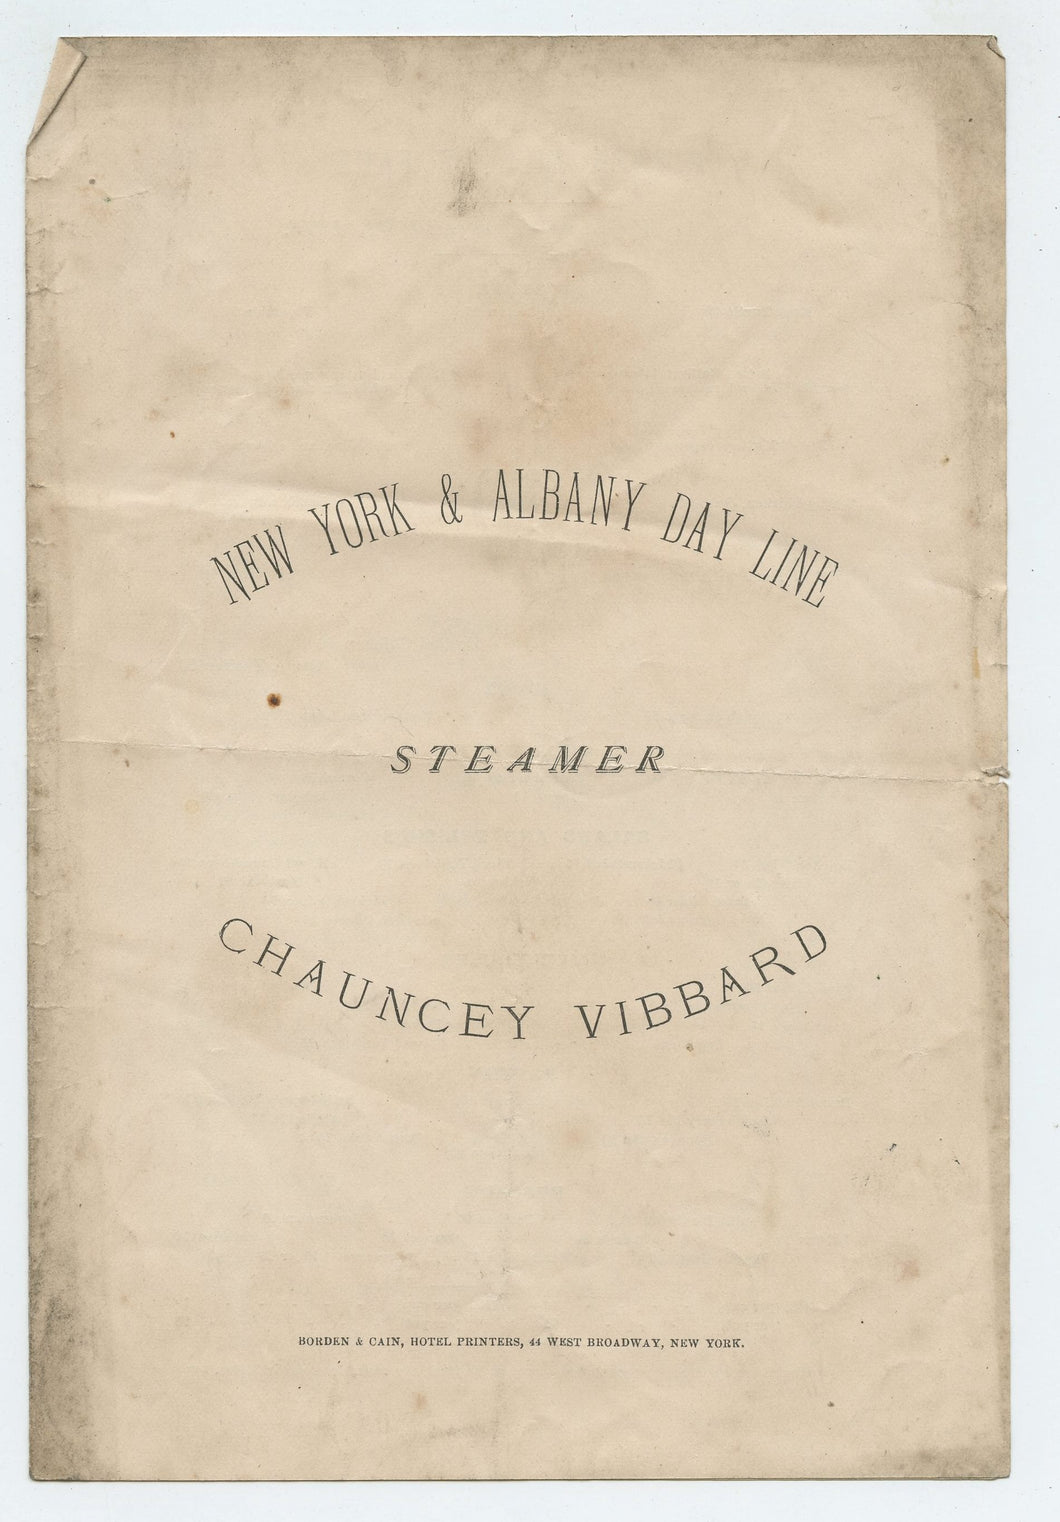 Menu & Time Table from New York & Albany Day Line Steamer Chauncey Vibbard